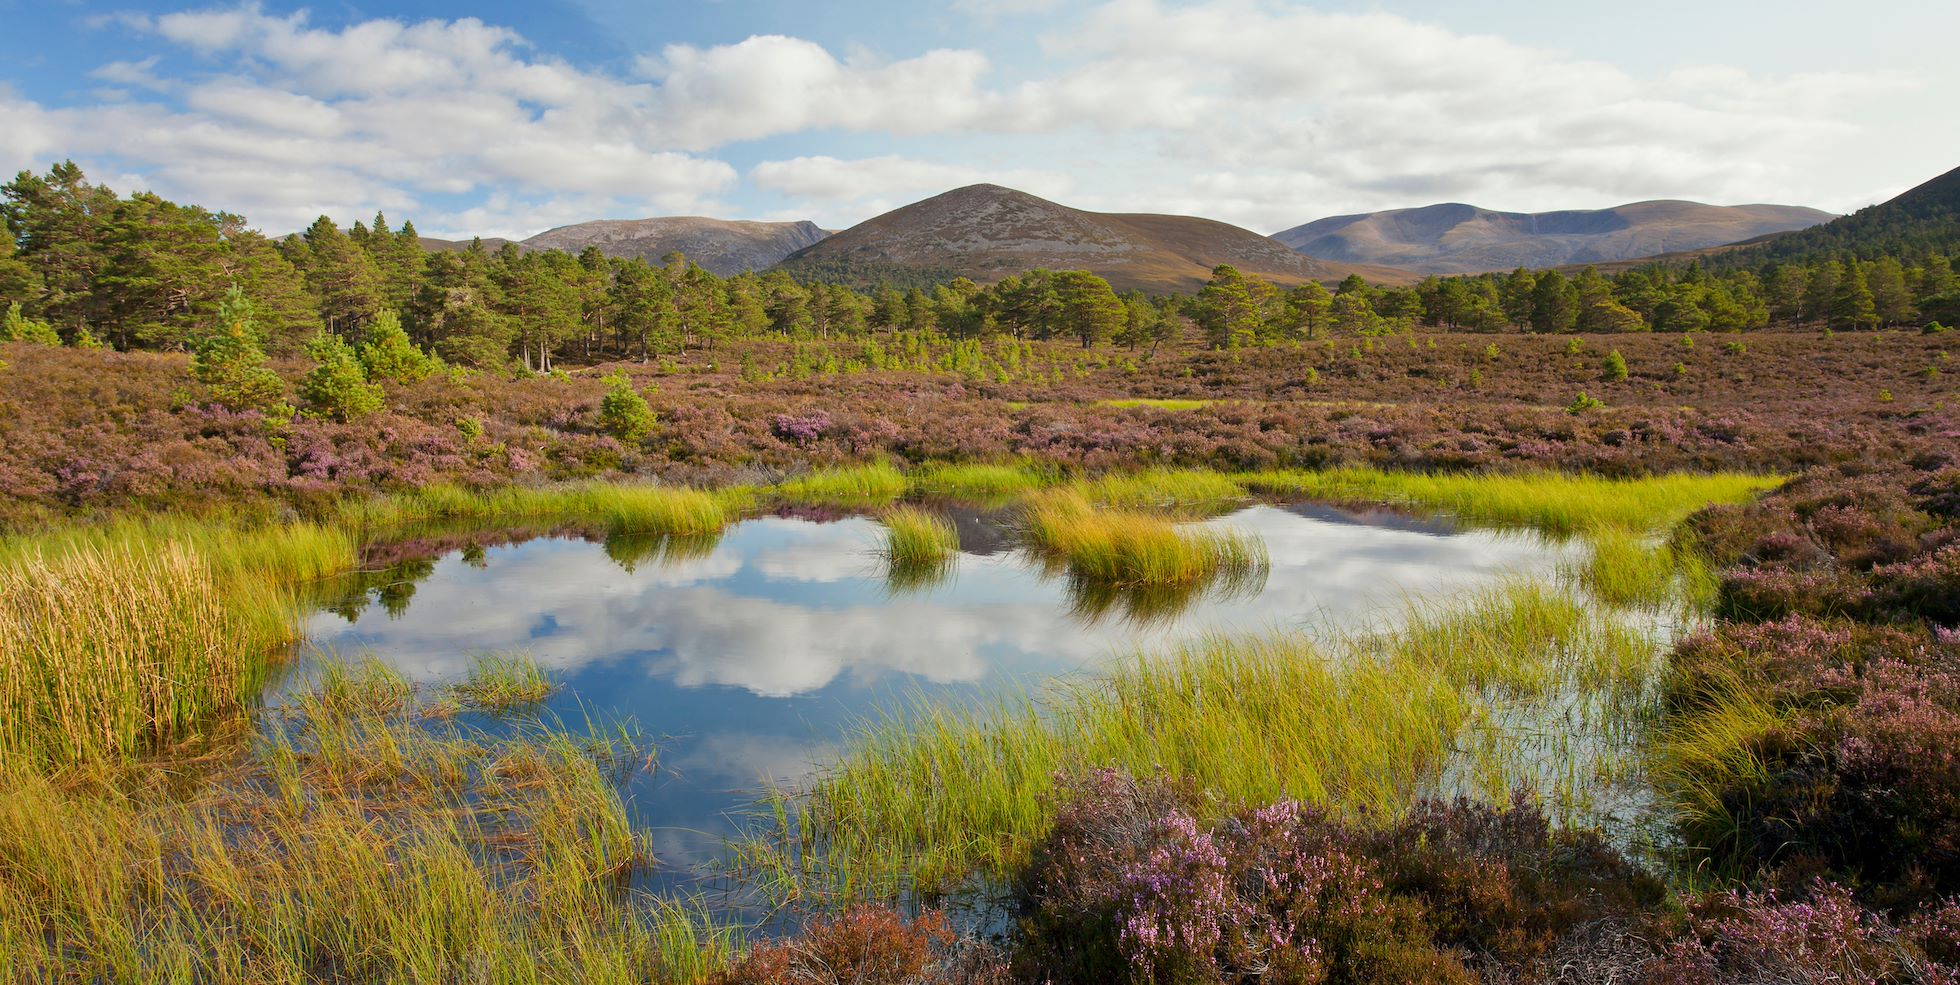 Small lochan surrounded by heather and Caledonian pine forest, Rothiemurchus, Cairngorms National Park, Scotland, UK